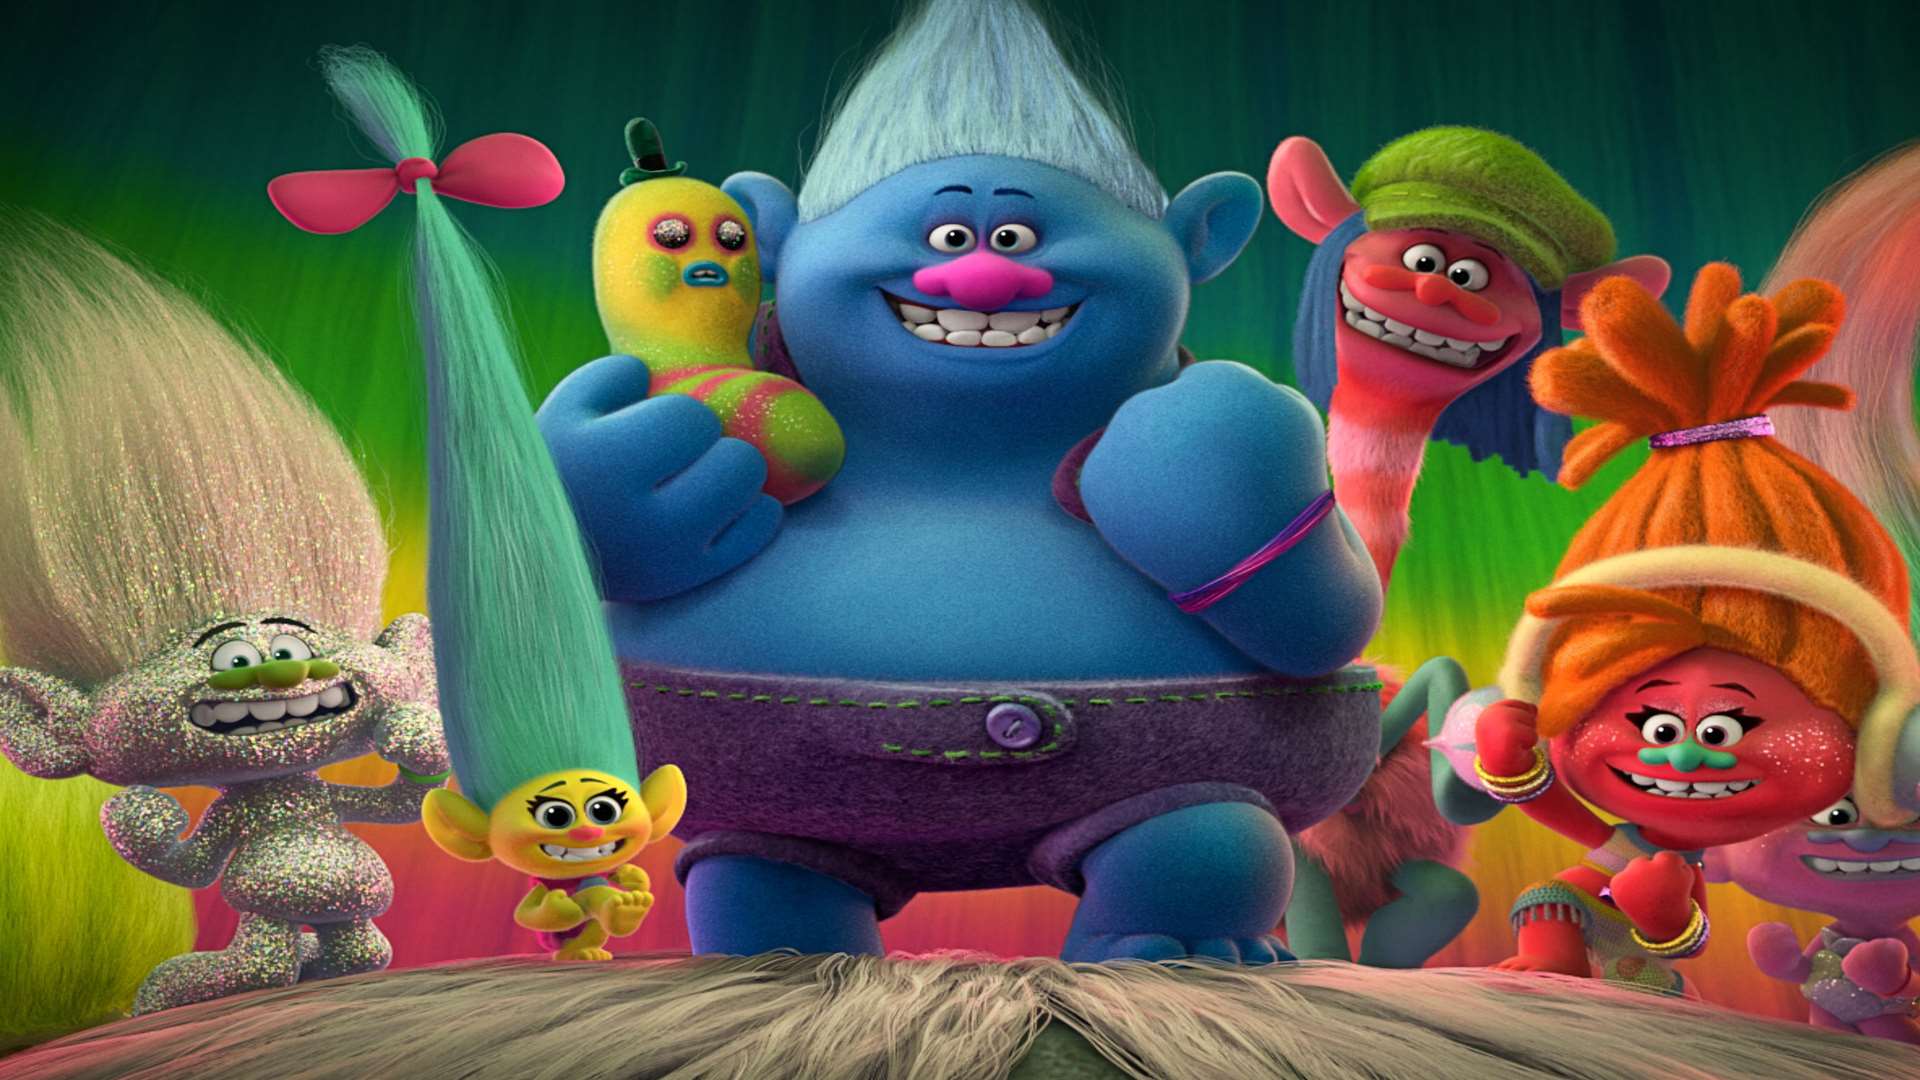 Trolls has been exceptionally popular but should it be in the top 50? Picture: PA/ Fox